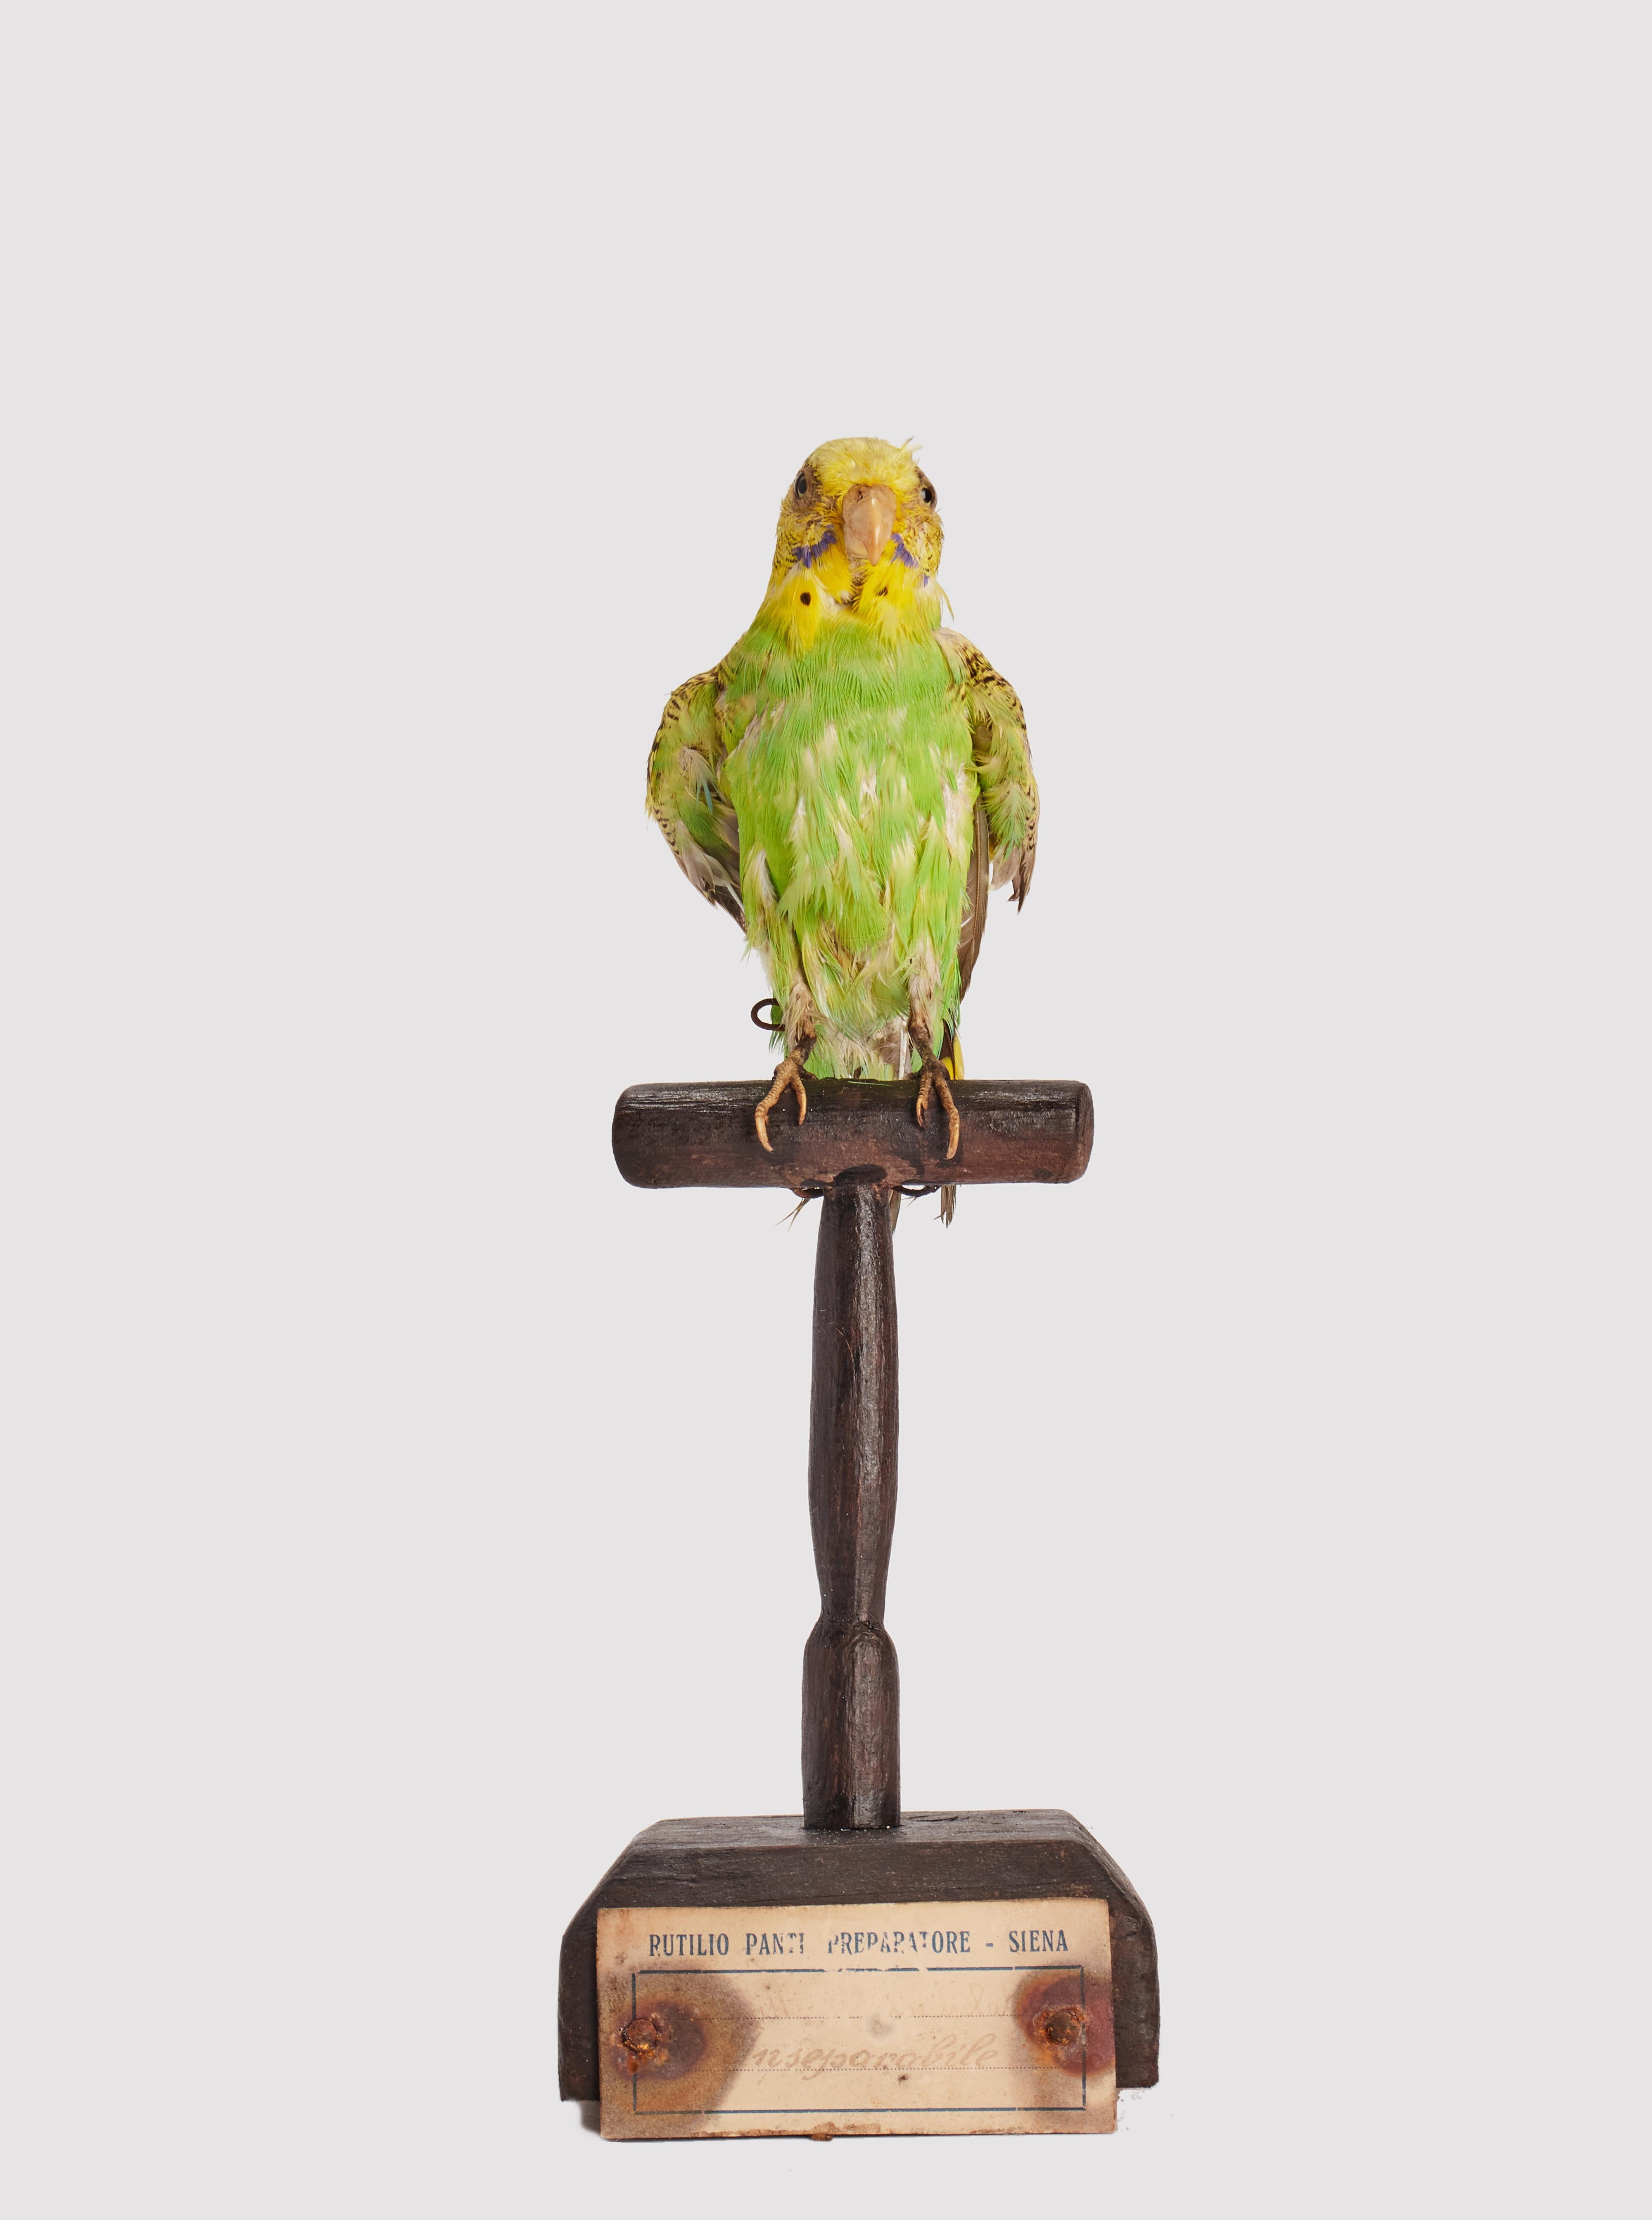 Natural specimen from Wunderkammer Stuffed bird (Melopsittacus undulatus) Corrugated parakeet mounted on a wooden base with cartouche Specimen for laboratory and Natural history cabinet. S. Brogi Naturalista. Siena, Italy 1880 ca.